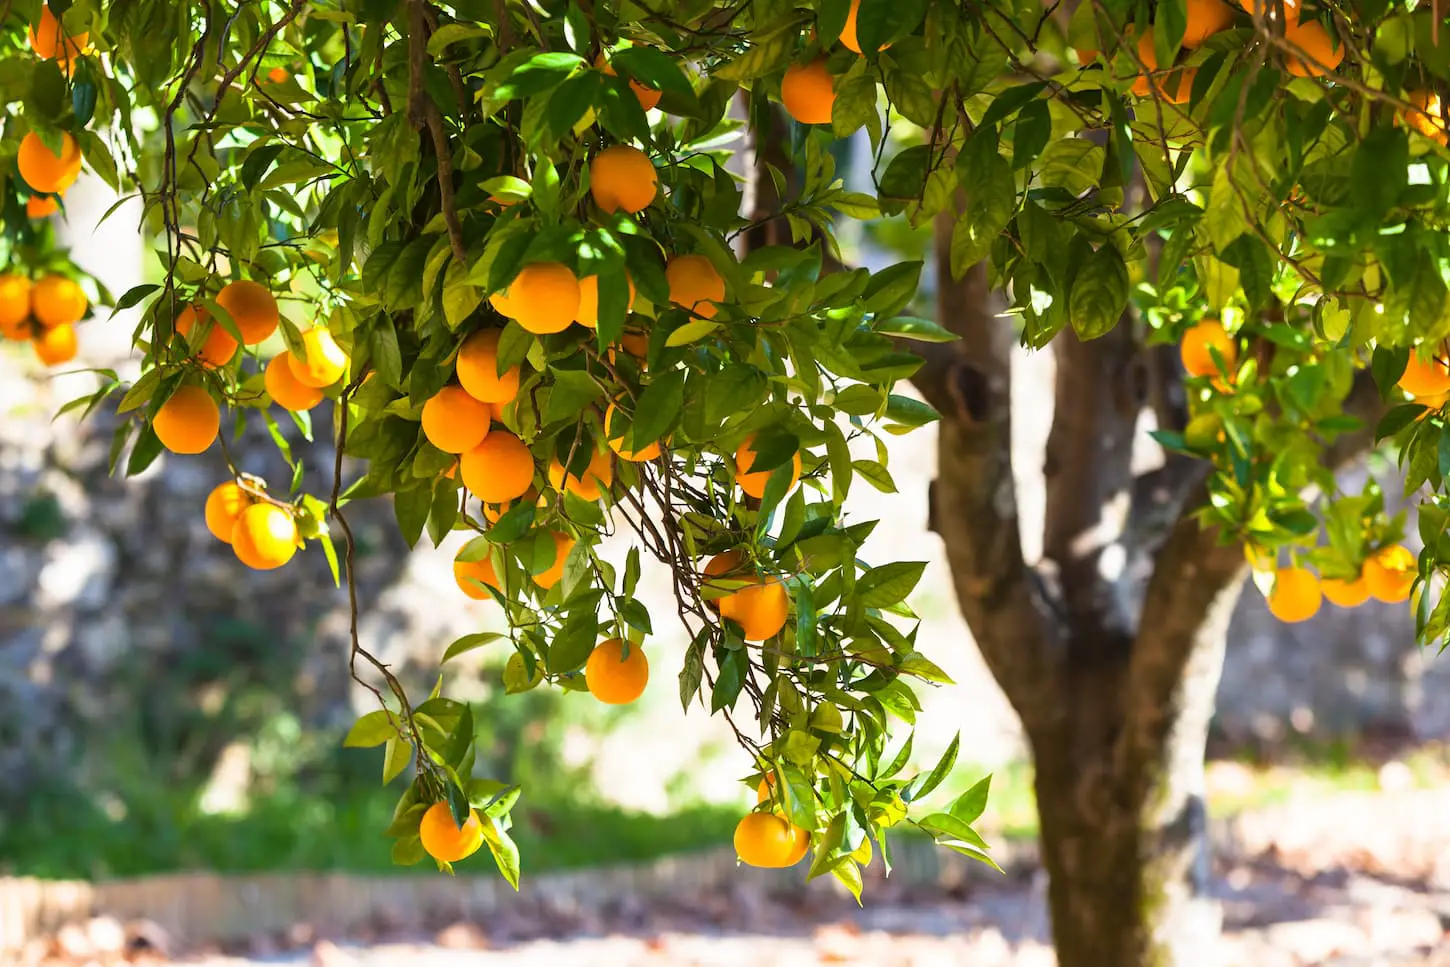 How to Plant Citrus Trees: the Soil, Spacing, Light, & Food